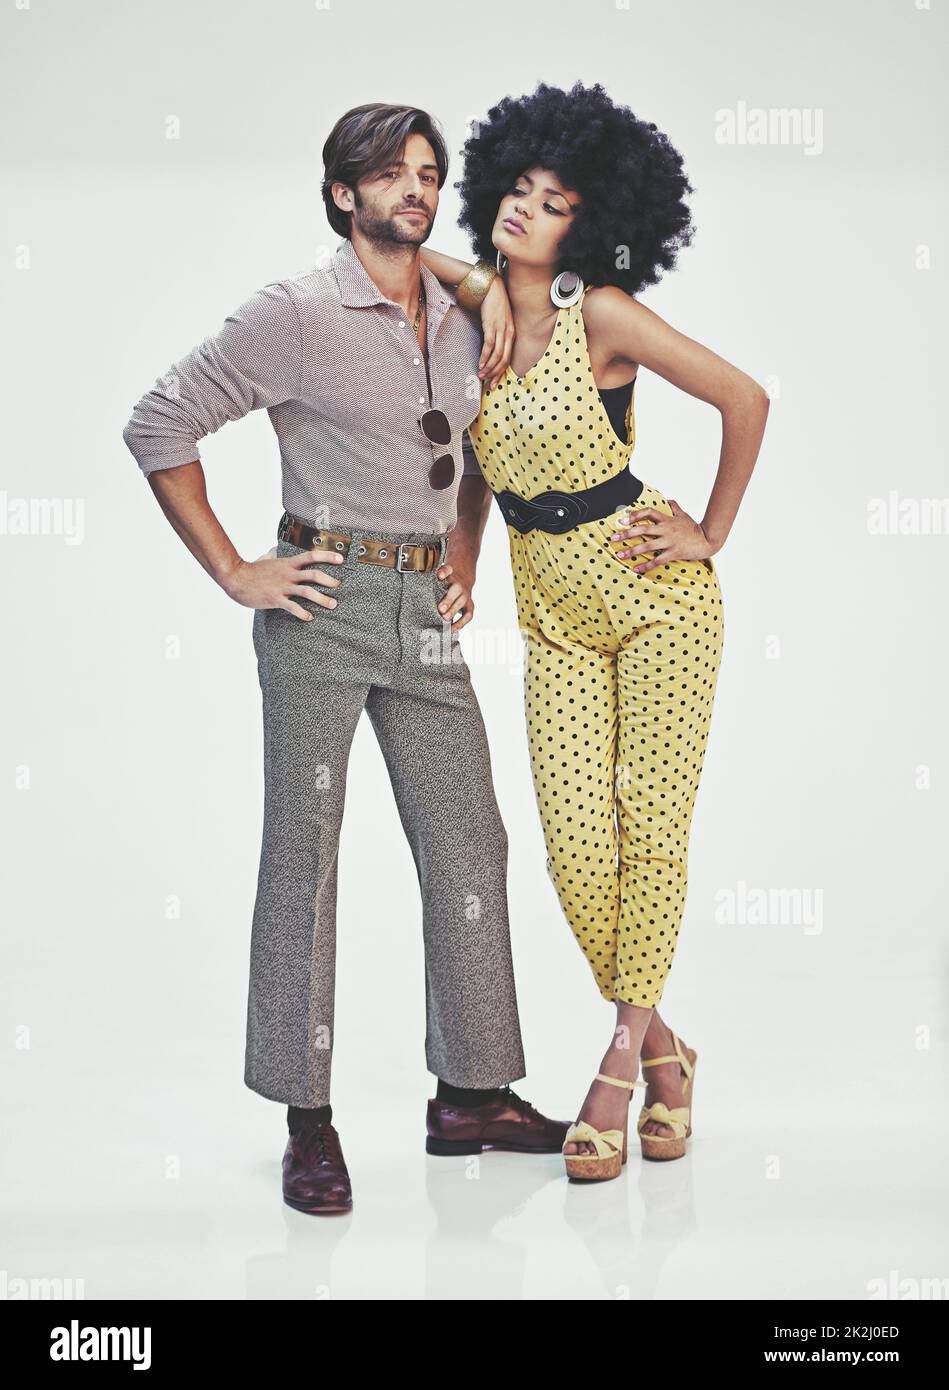 Retro romance. An attractive young couple standing together in retro 70s clothing. Stock Photo